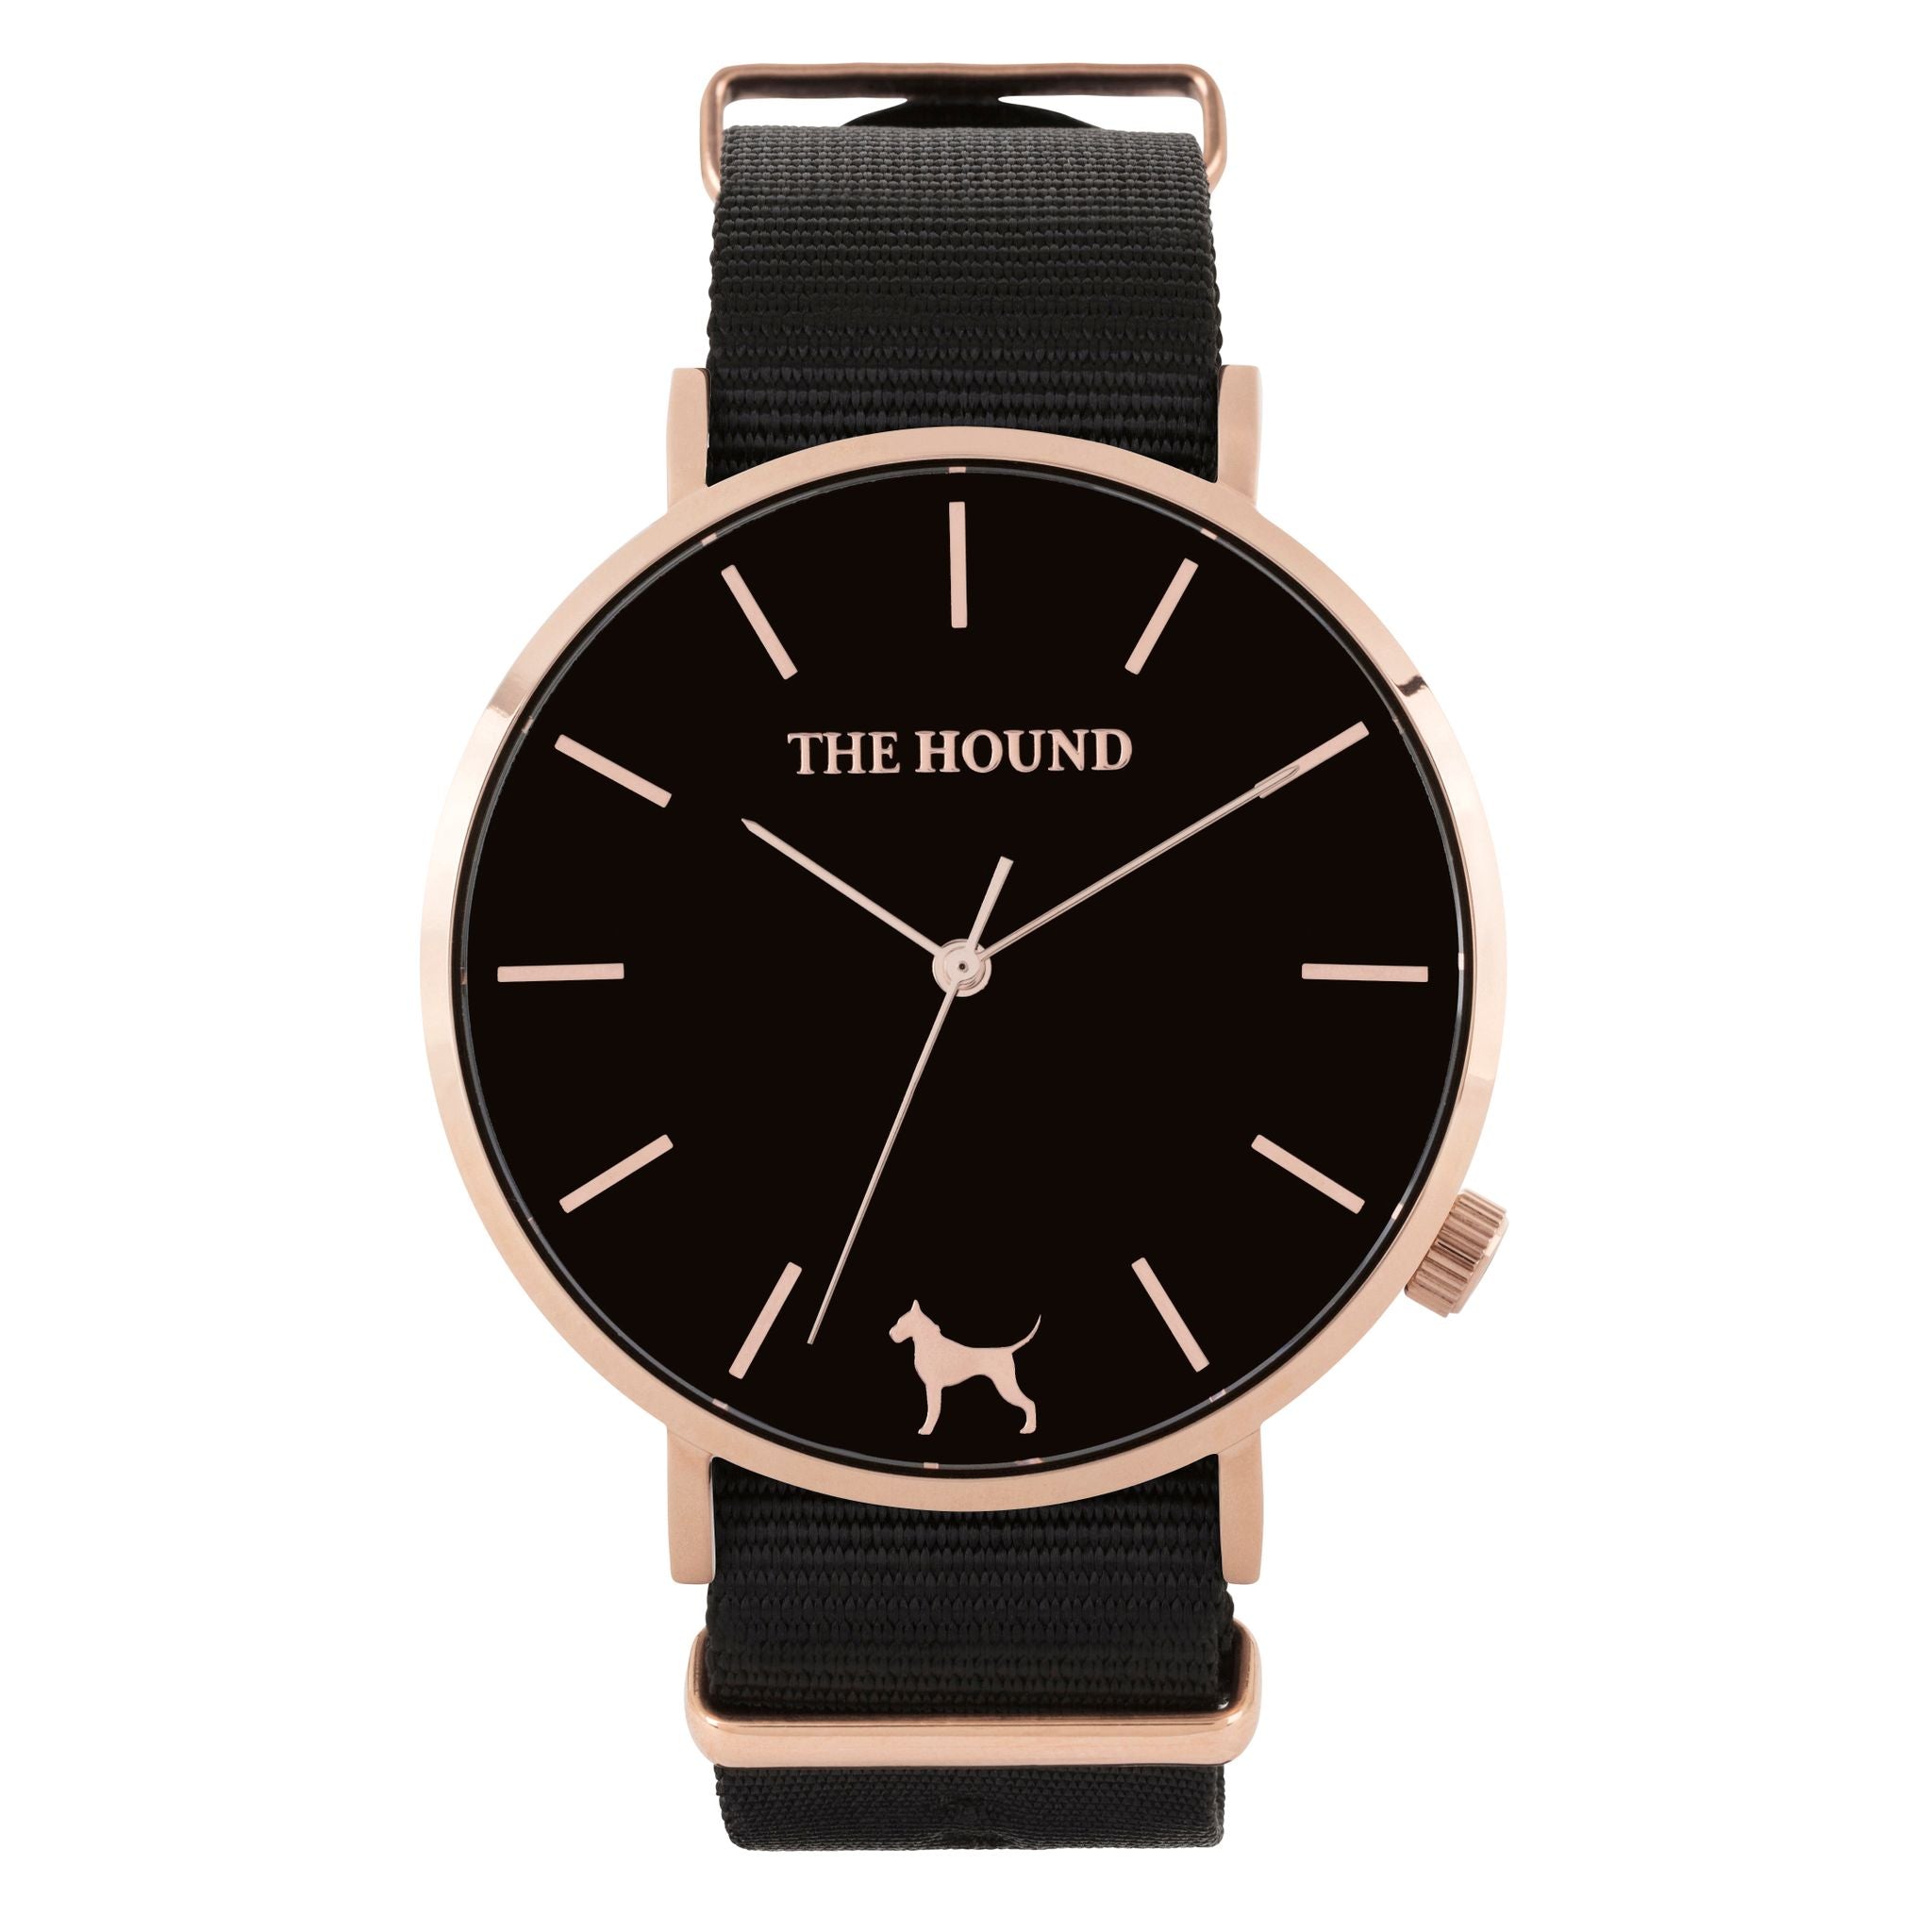 Rose gold & black face watch with black nato